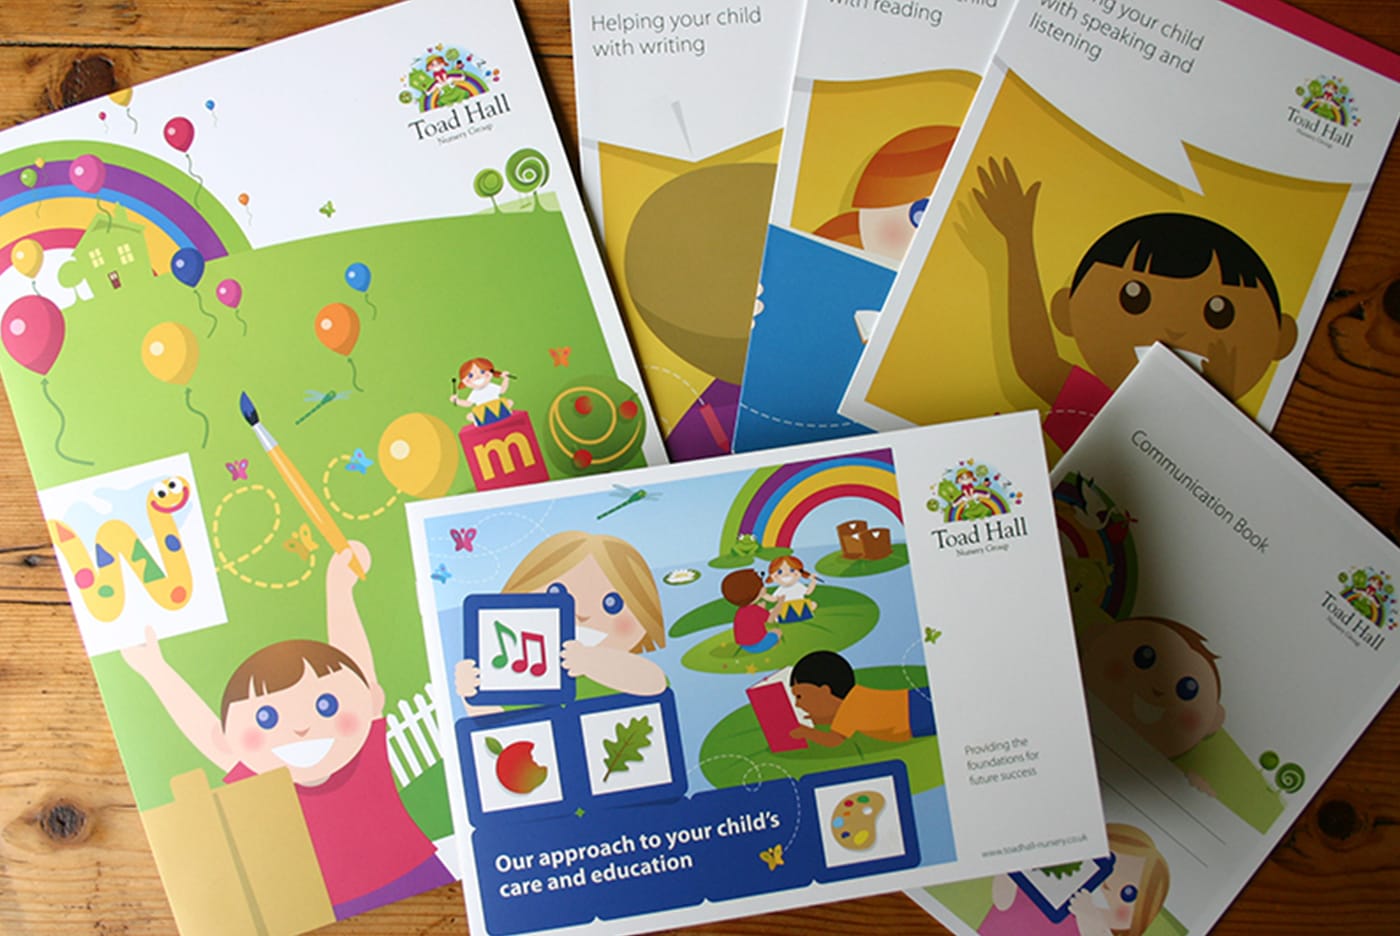 Bespoke fun and lively graphics created on behalf of a nursery group.